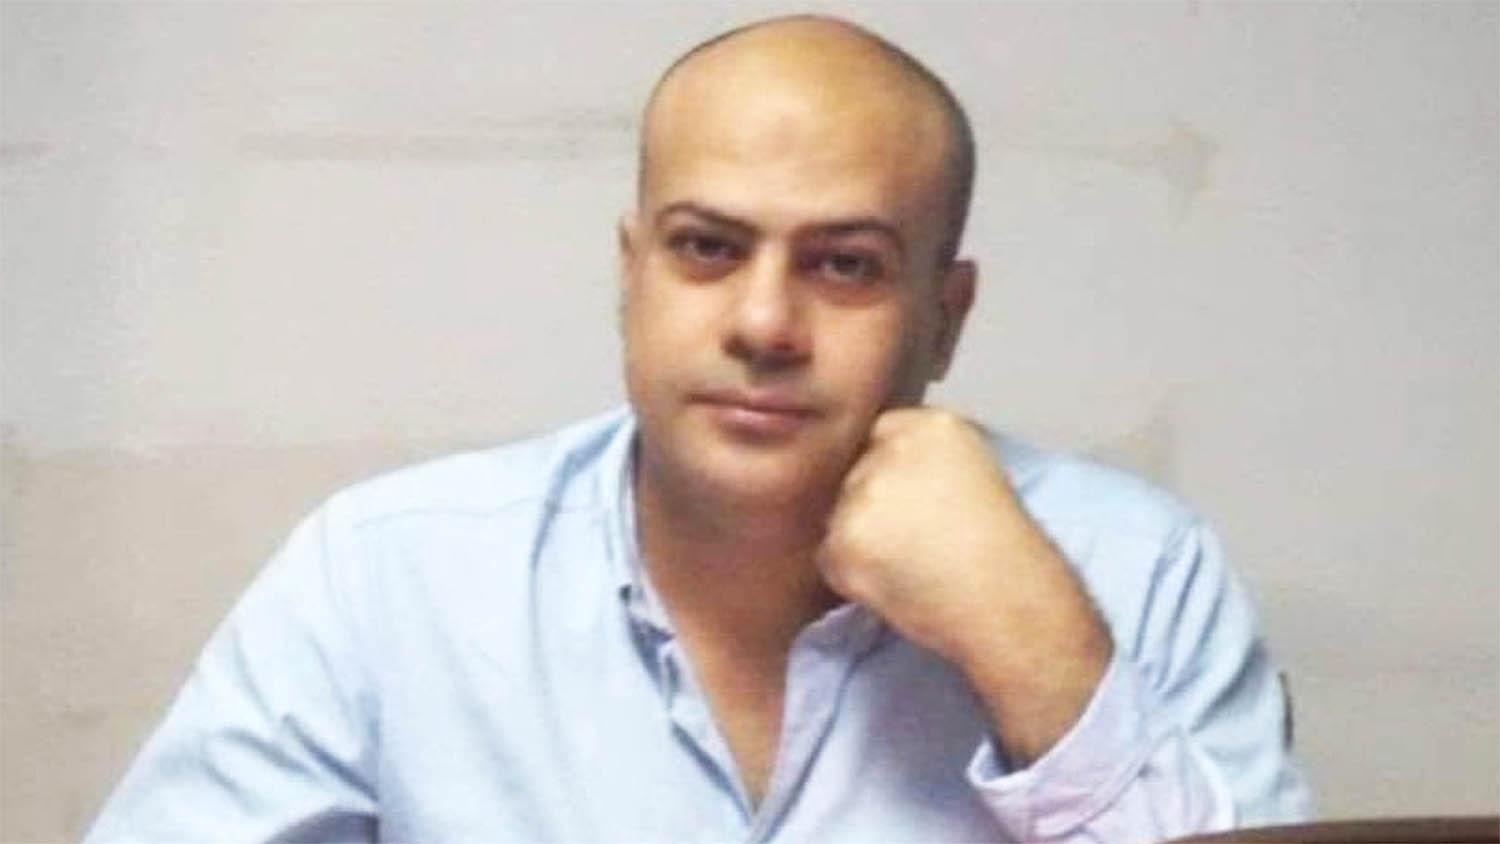 Security services detained Hadhoud in February and sent him to a psychiatric hospital in Cairo where he died